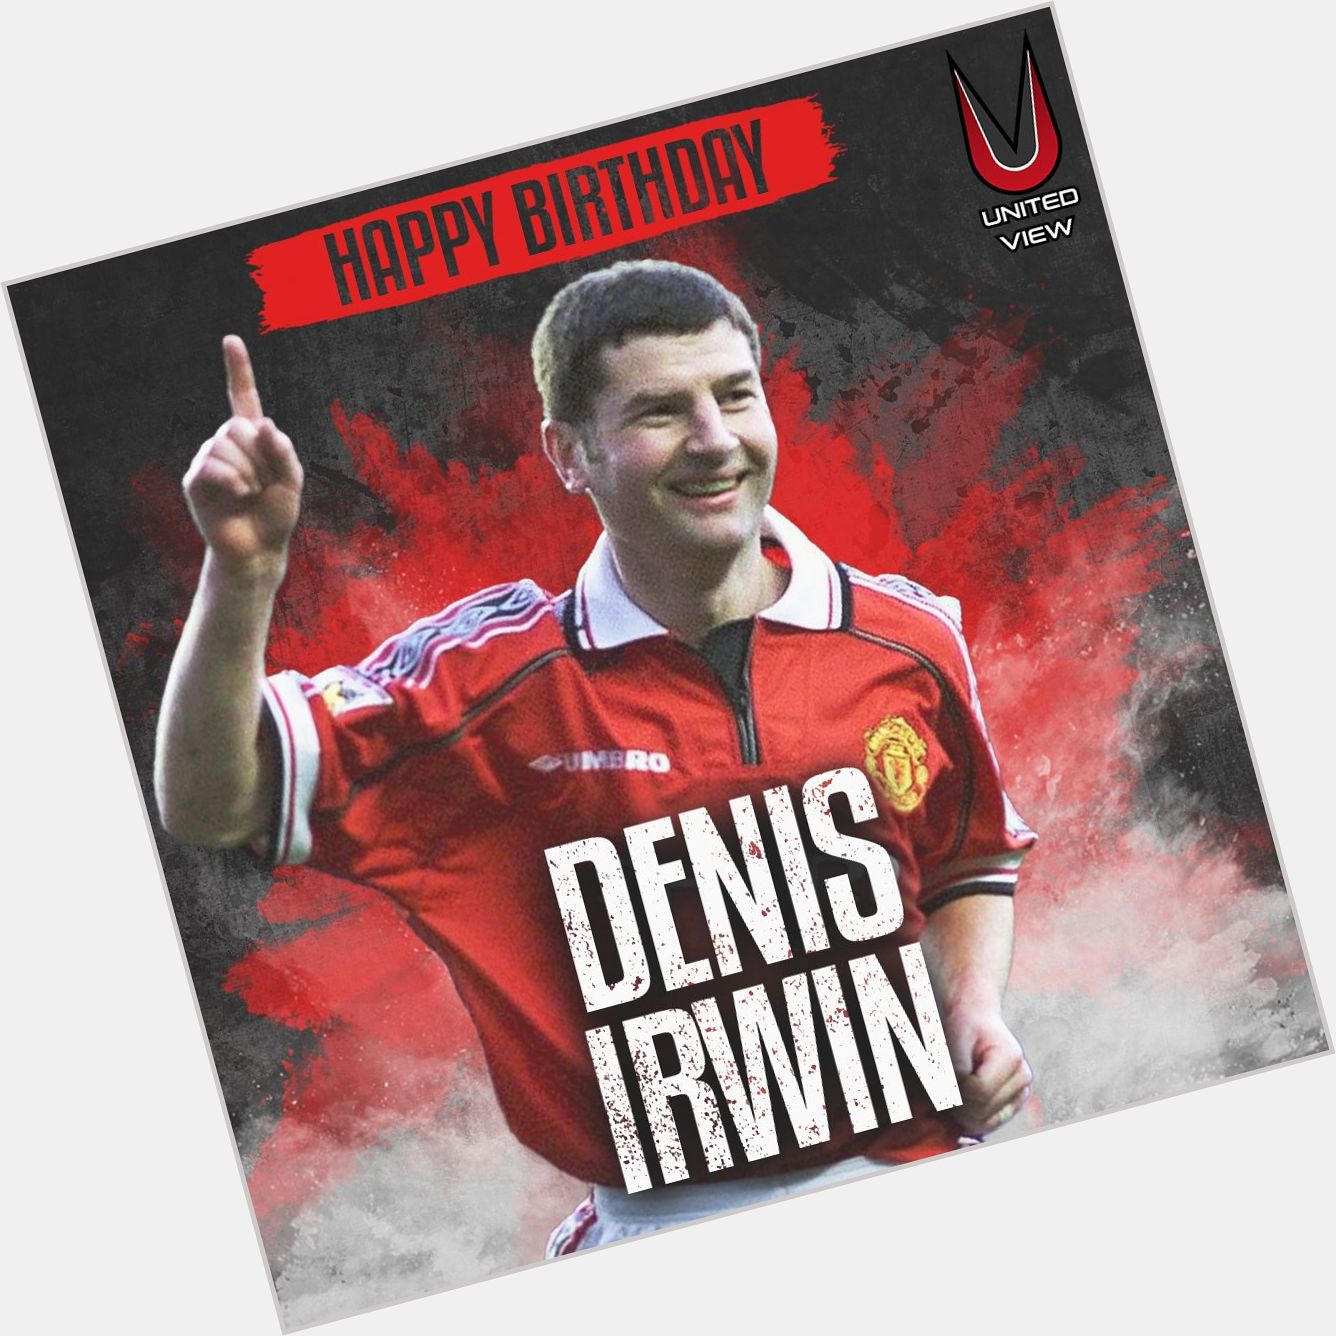 Happy birthday to Denis Irwin!

The former Manchester United left-back turns 56 years old today.  